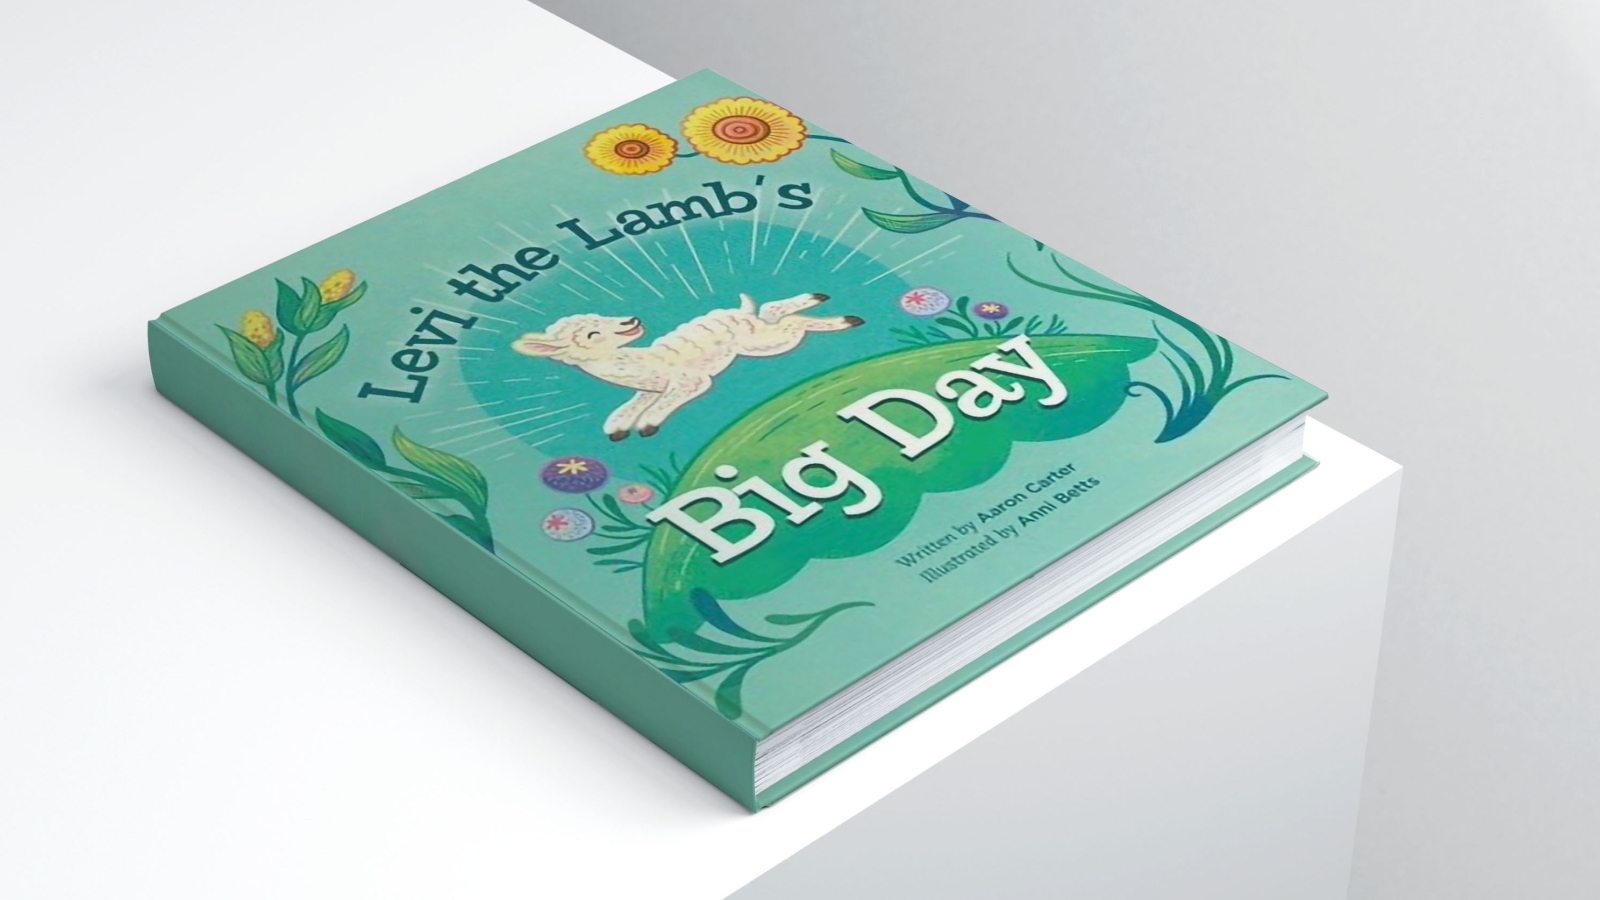 Levi the Lamb's Big Day book cover